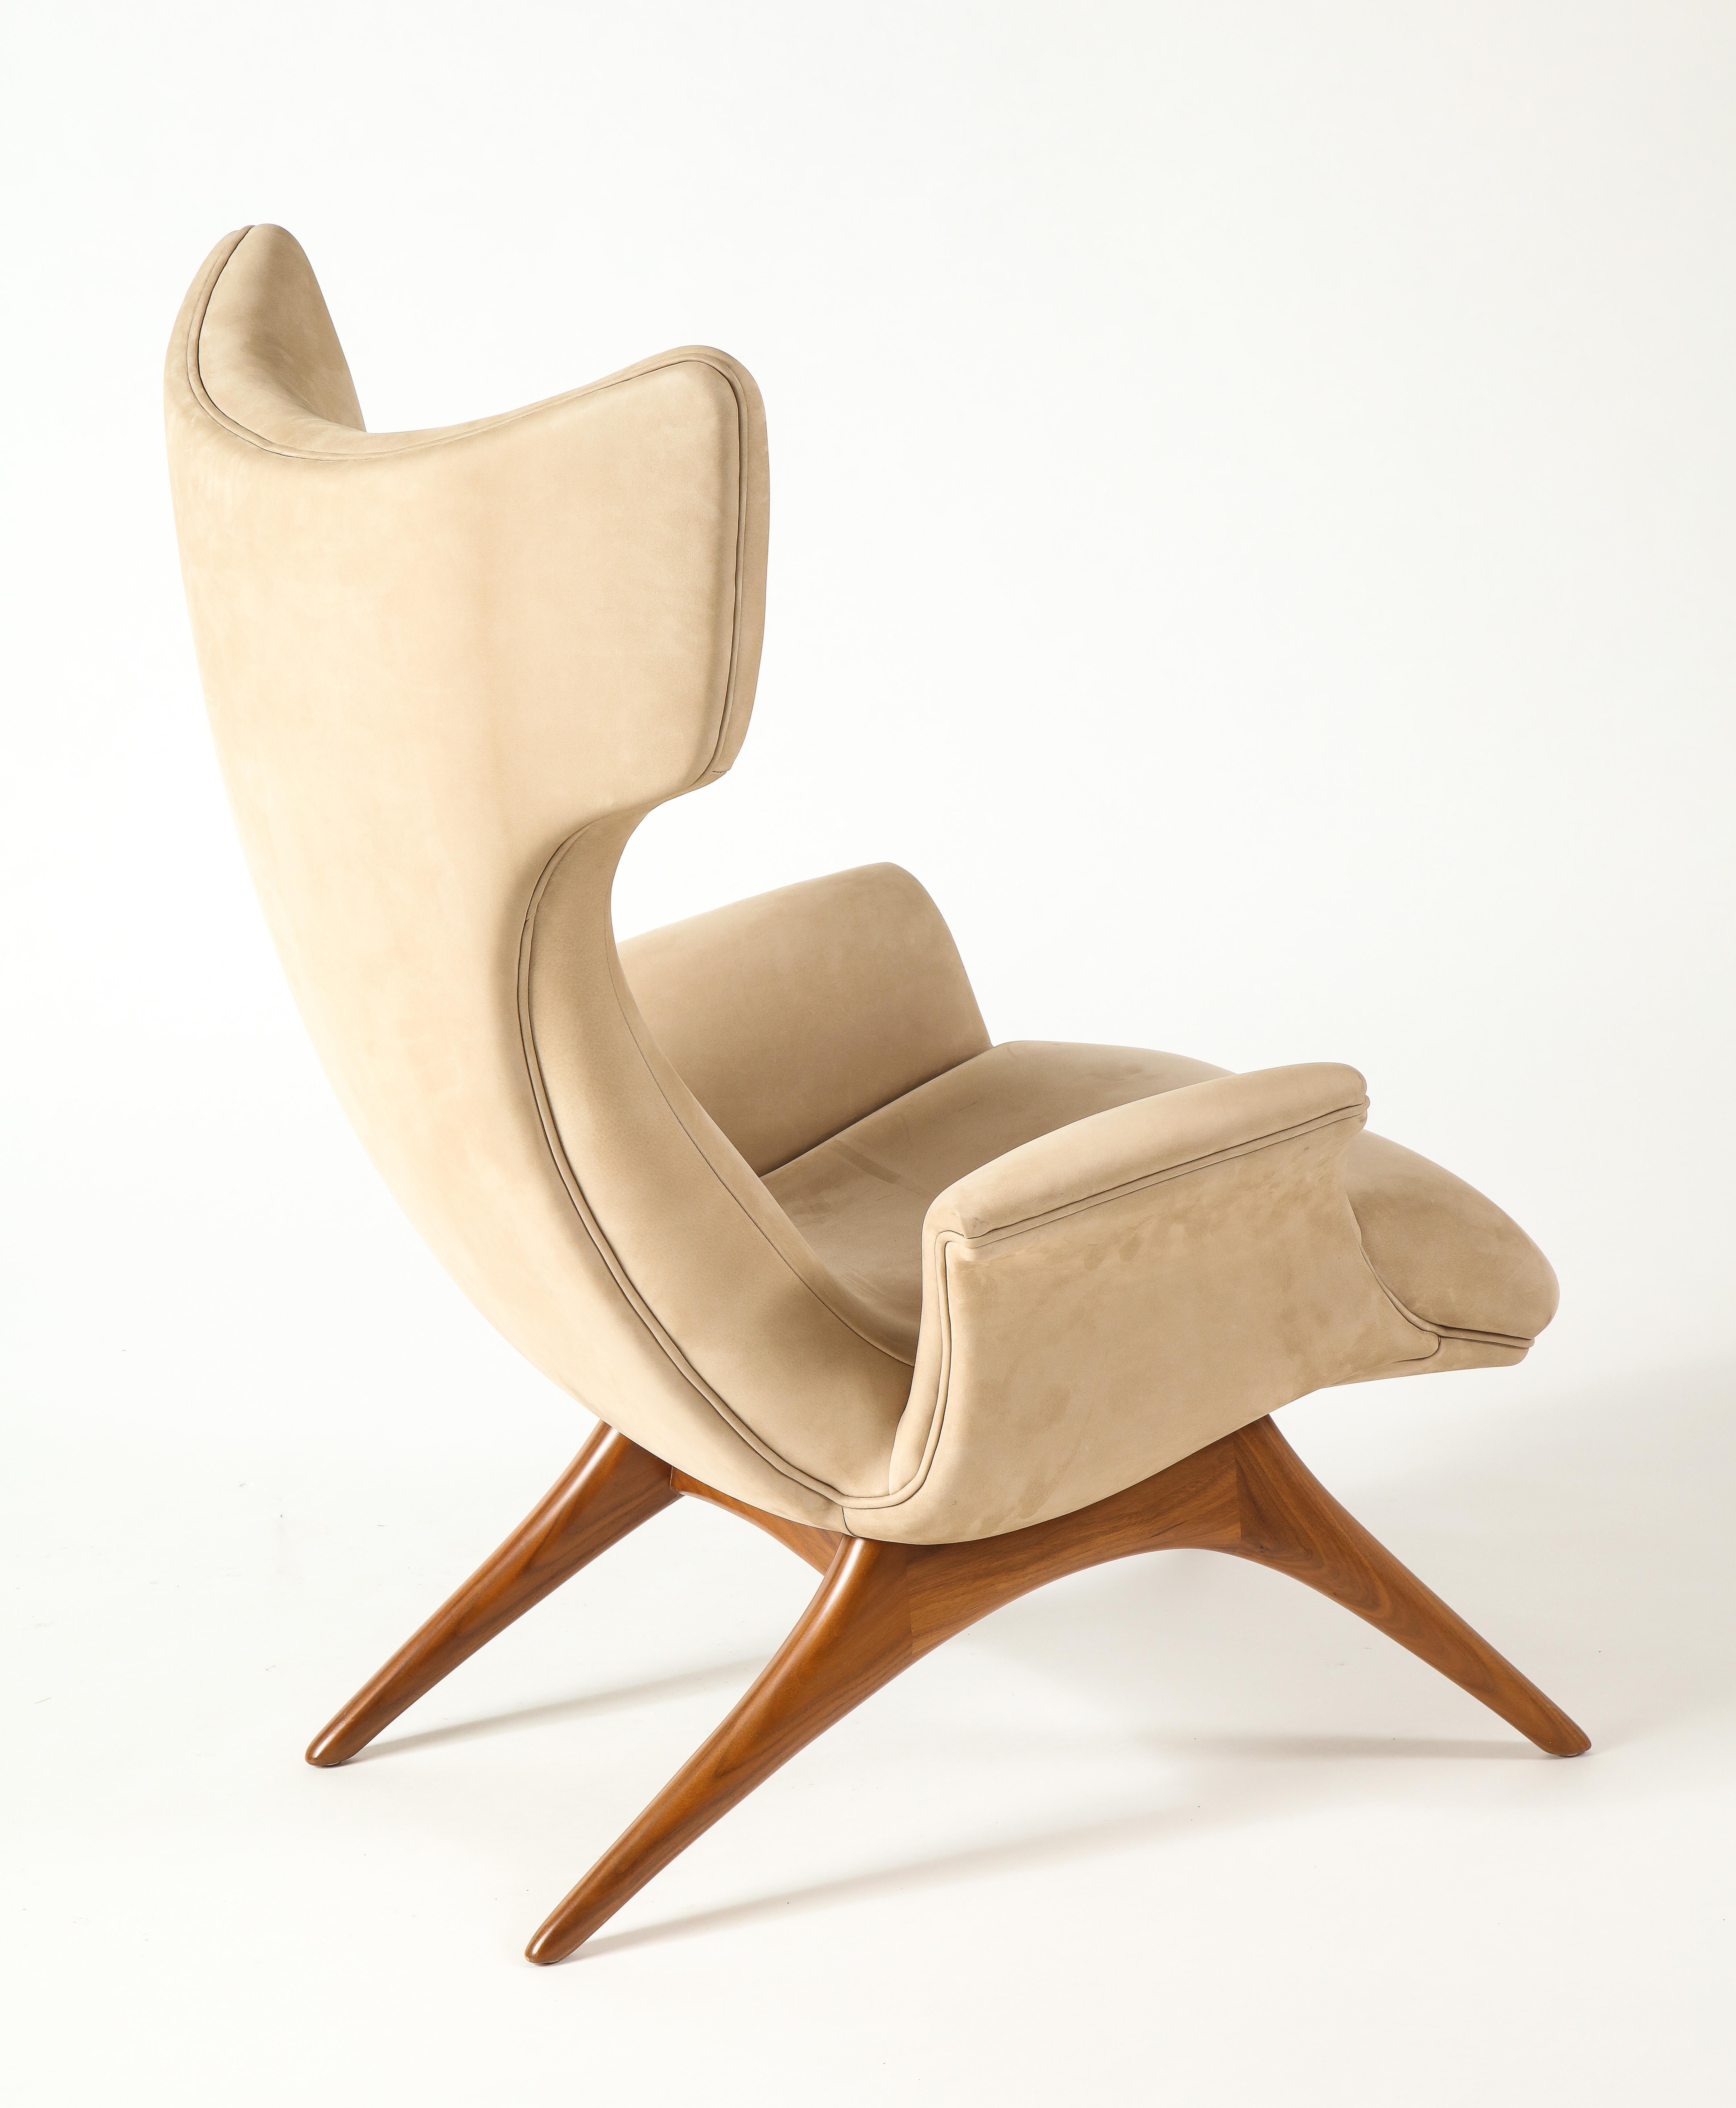 Vladimir Kagan Ondine Chair with Sueded Leather Upholstery & Natural Walnut Base 7